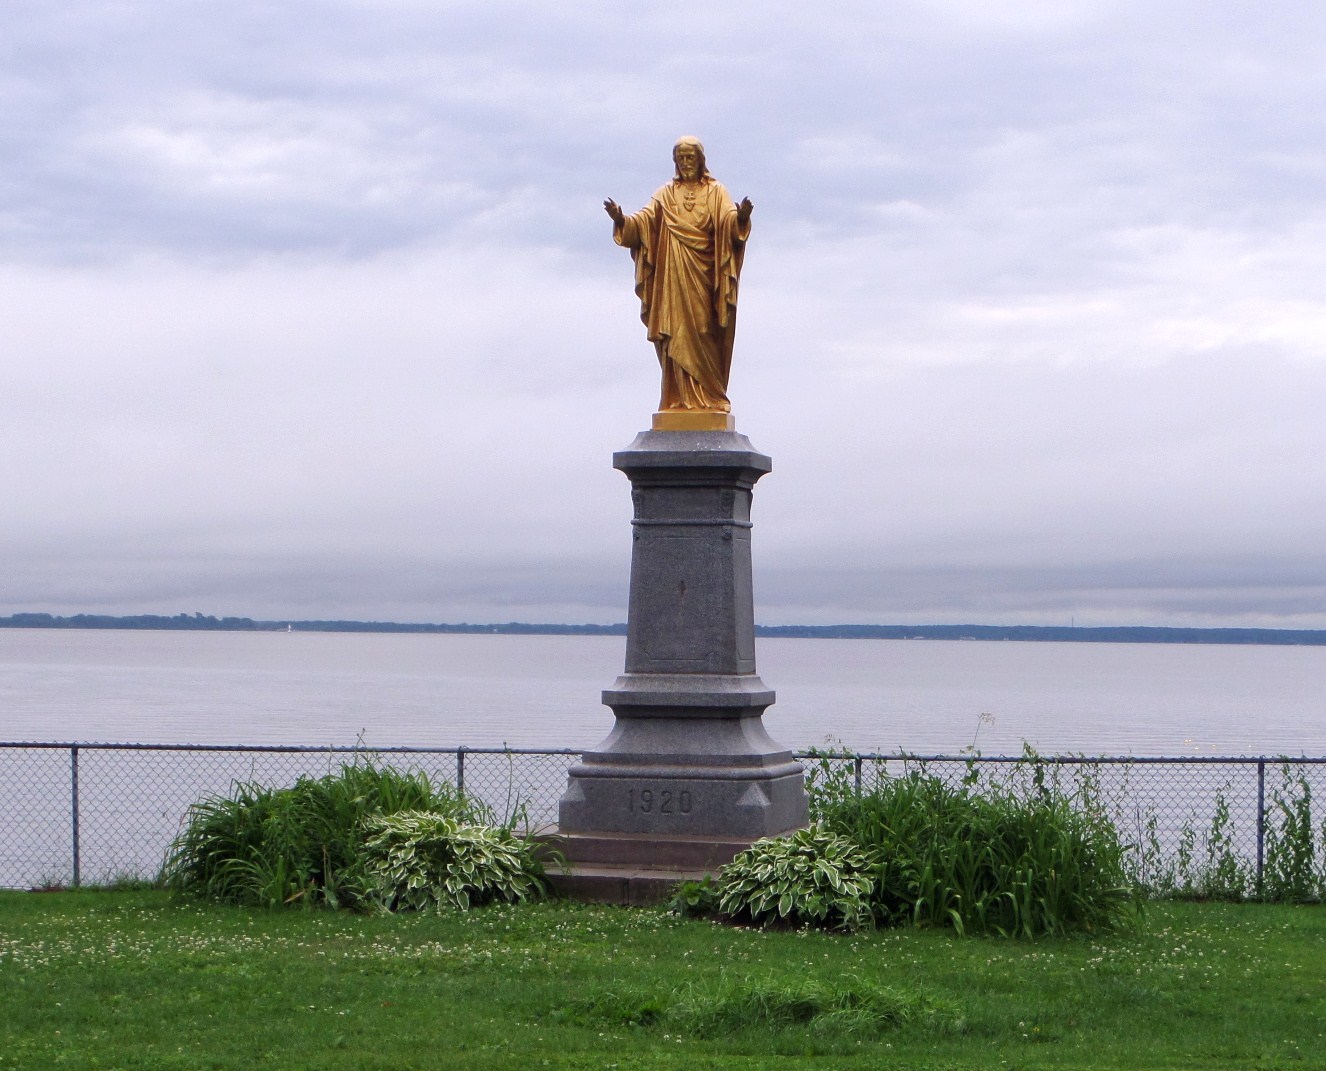 an image of a statue of jesus overlooking a body of water